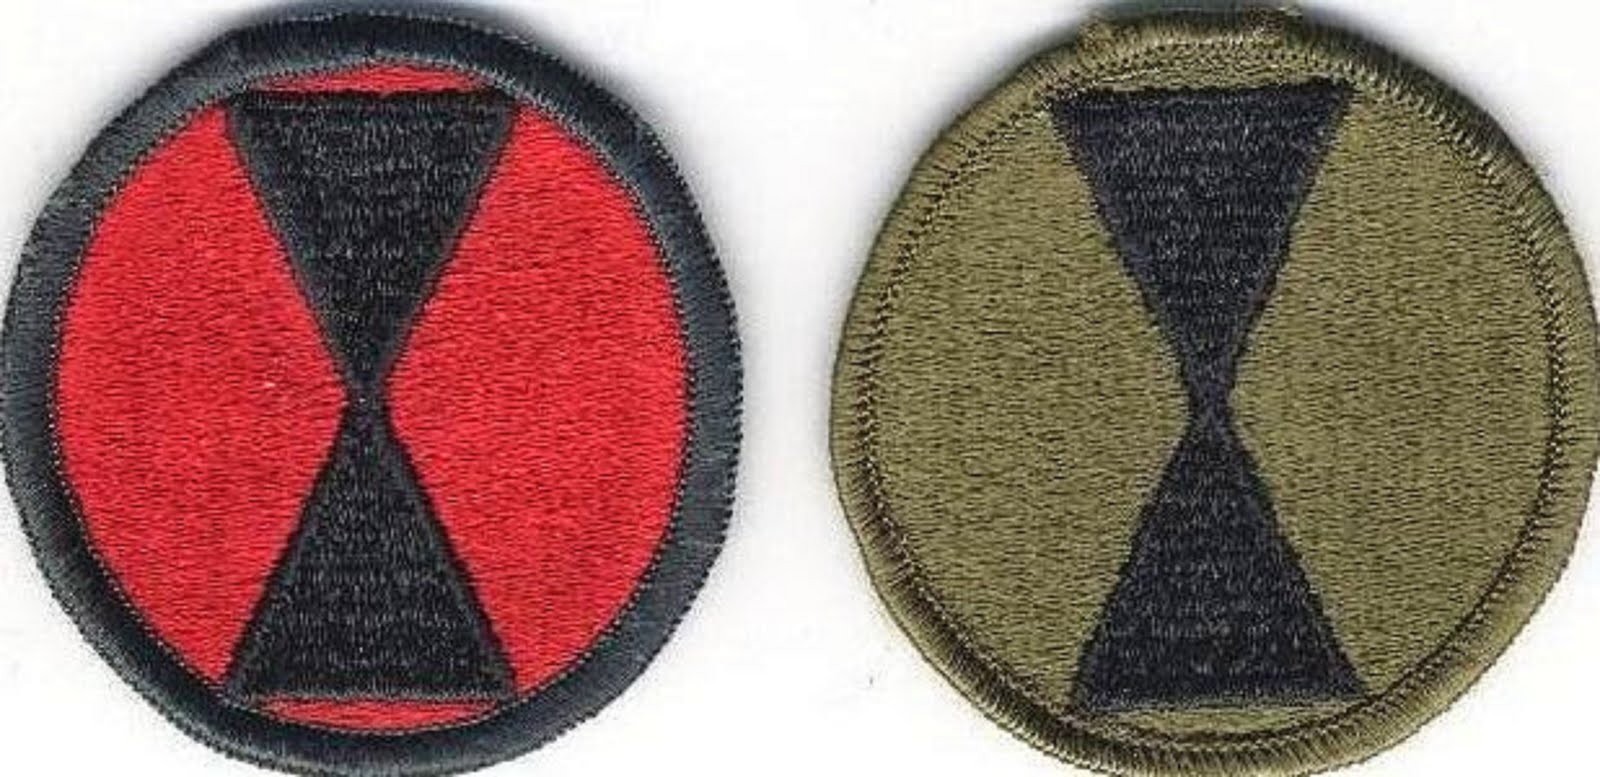 7th INFANTRY DIVISION (LIGHT) - COLORED AND CAMOUFLAGED